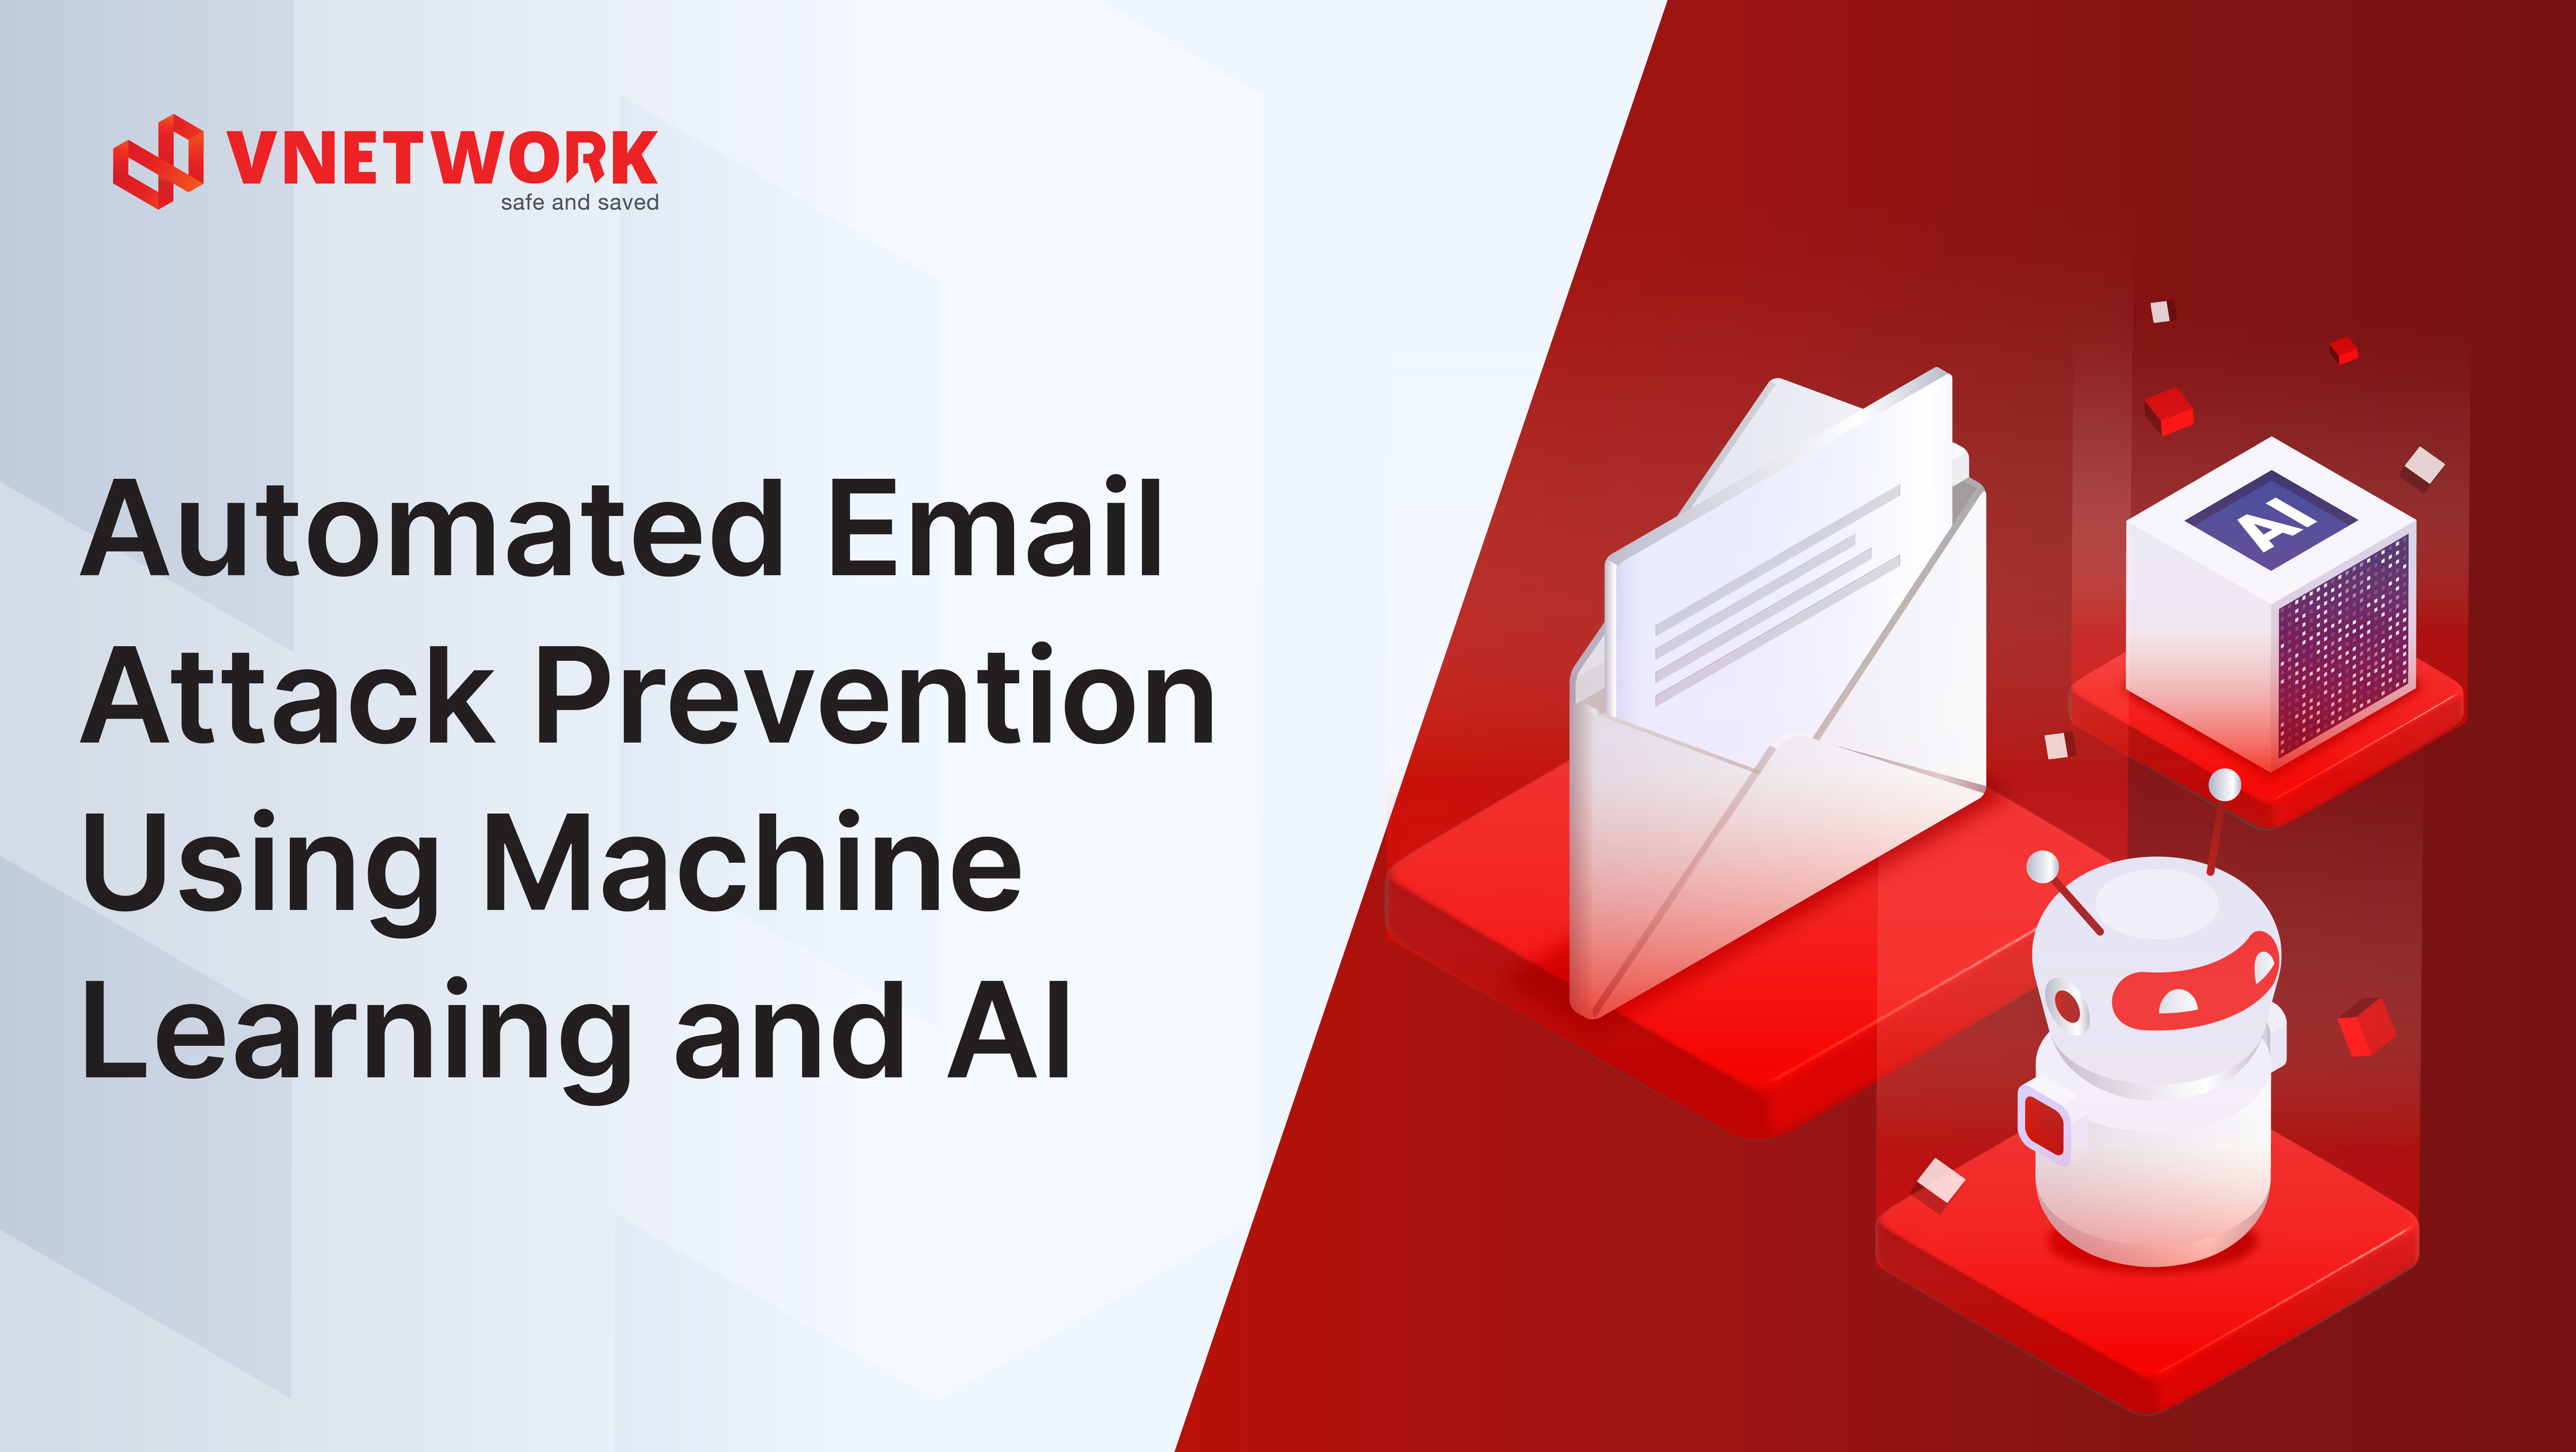 Application of Machine Learning and AI in Email Filtering